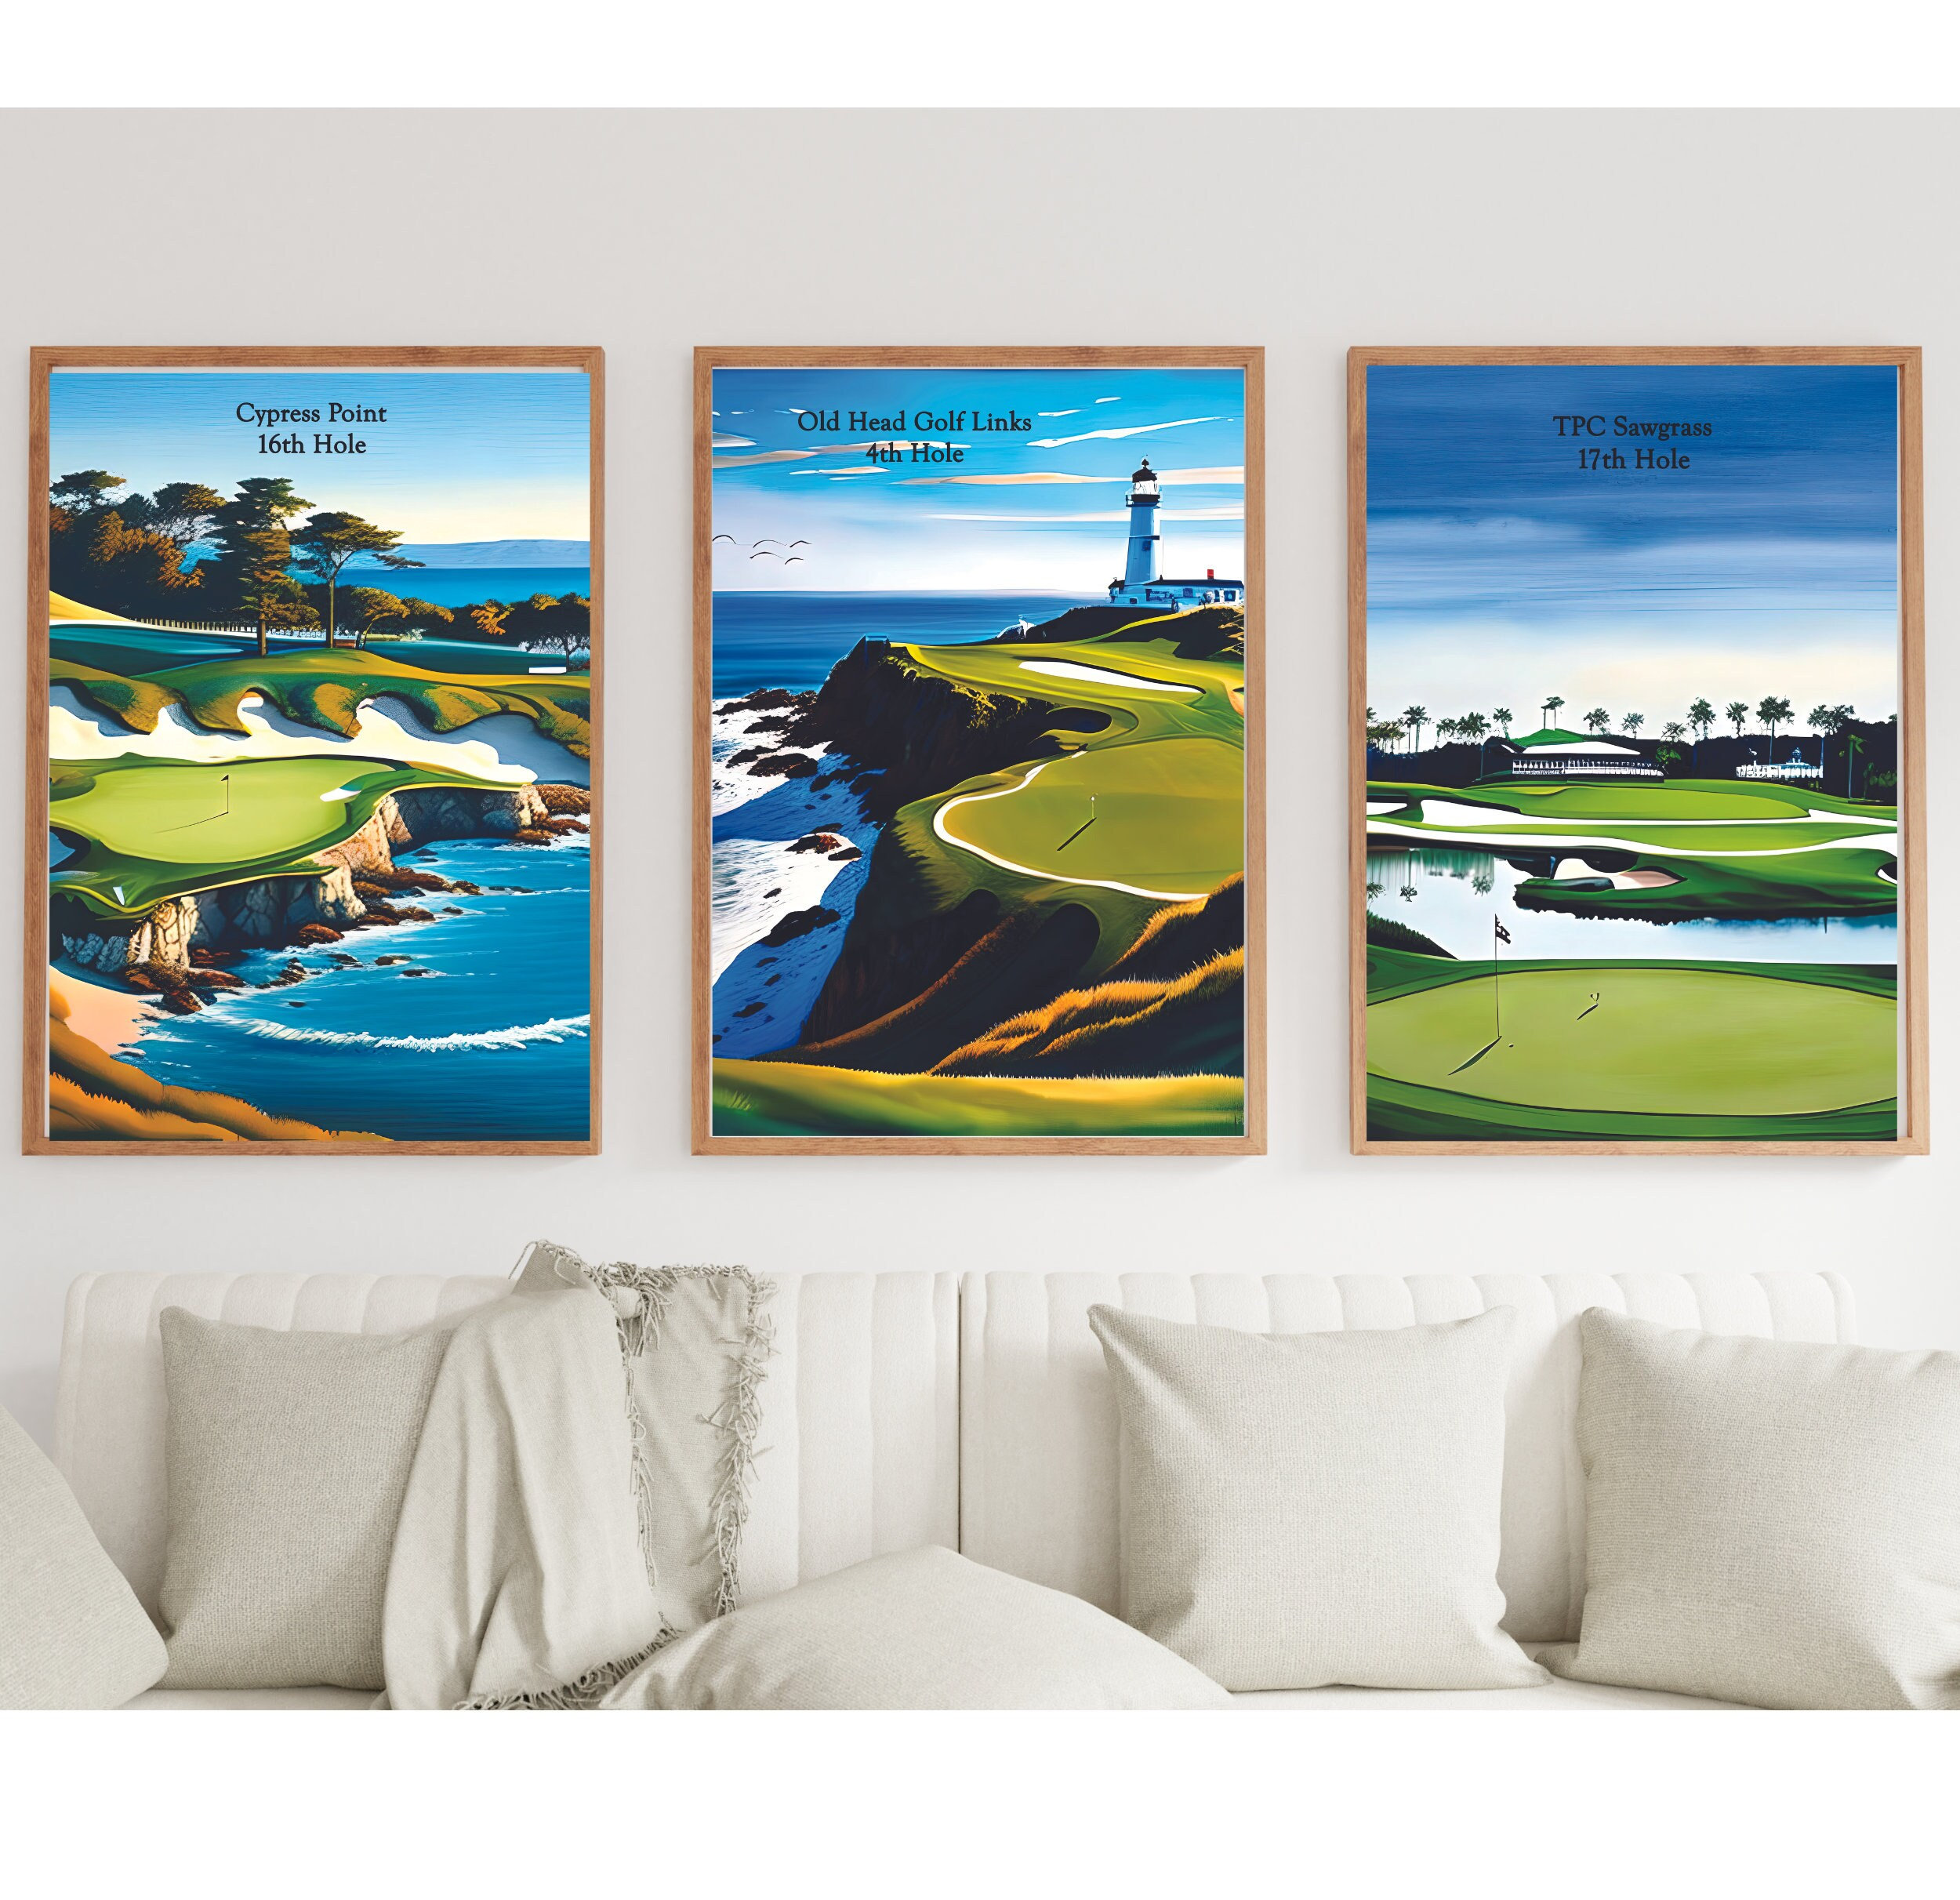 Tpc Sawgrass Picture Etsy